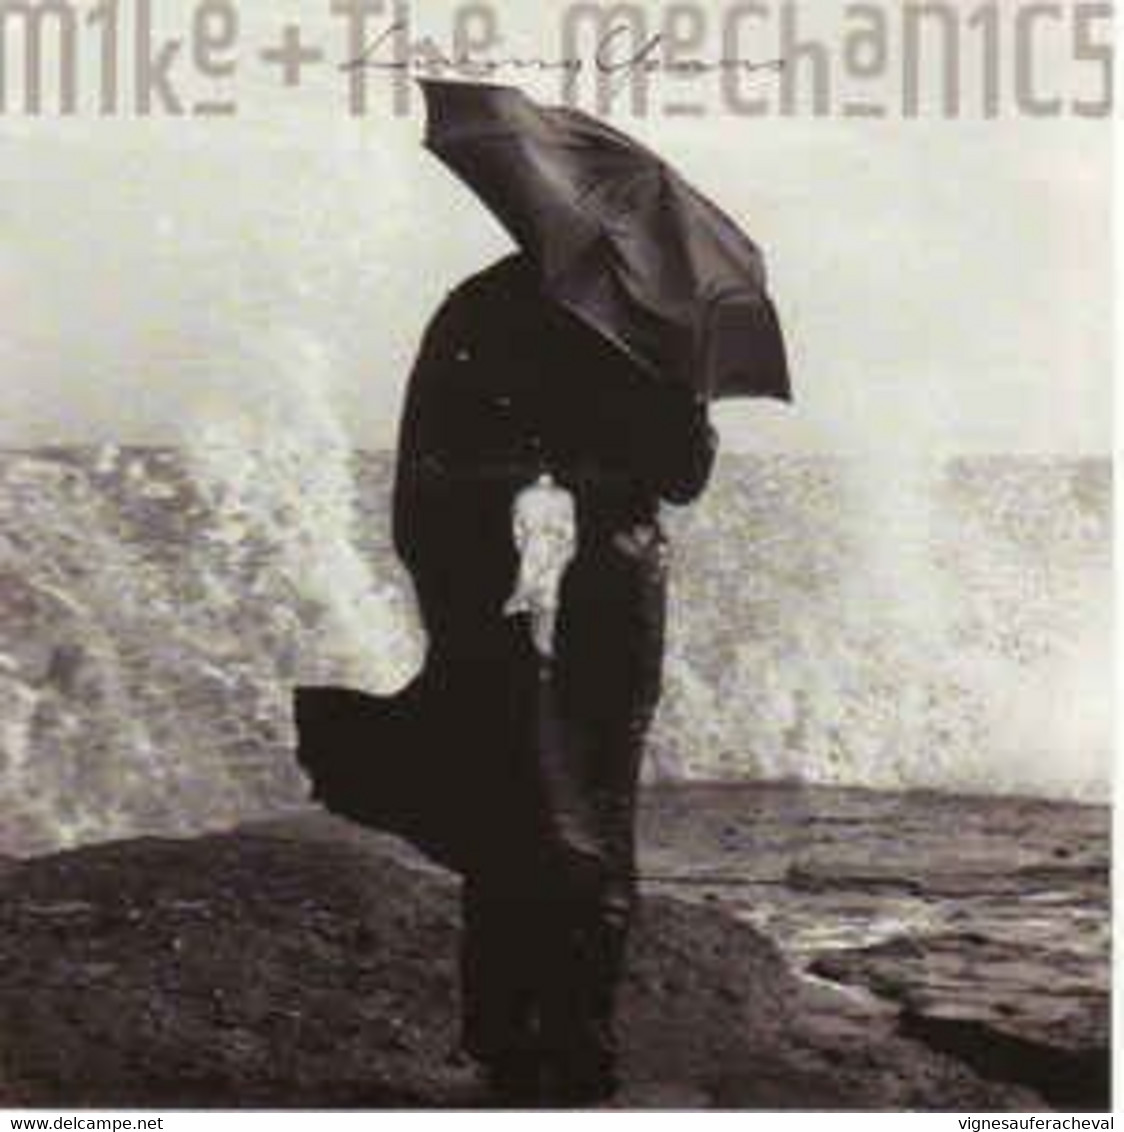 Mike & The Mechanics- Living Years - Other - English Music